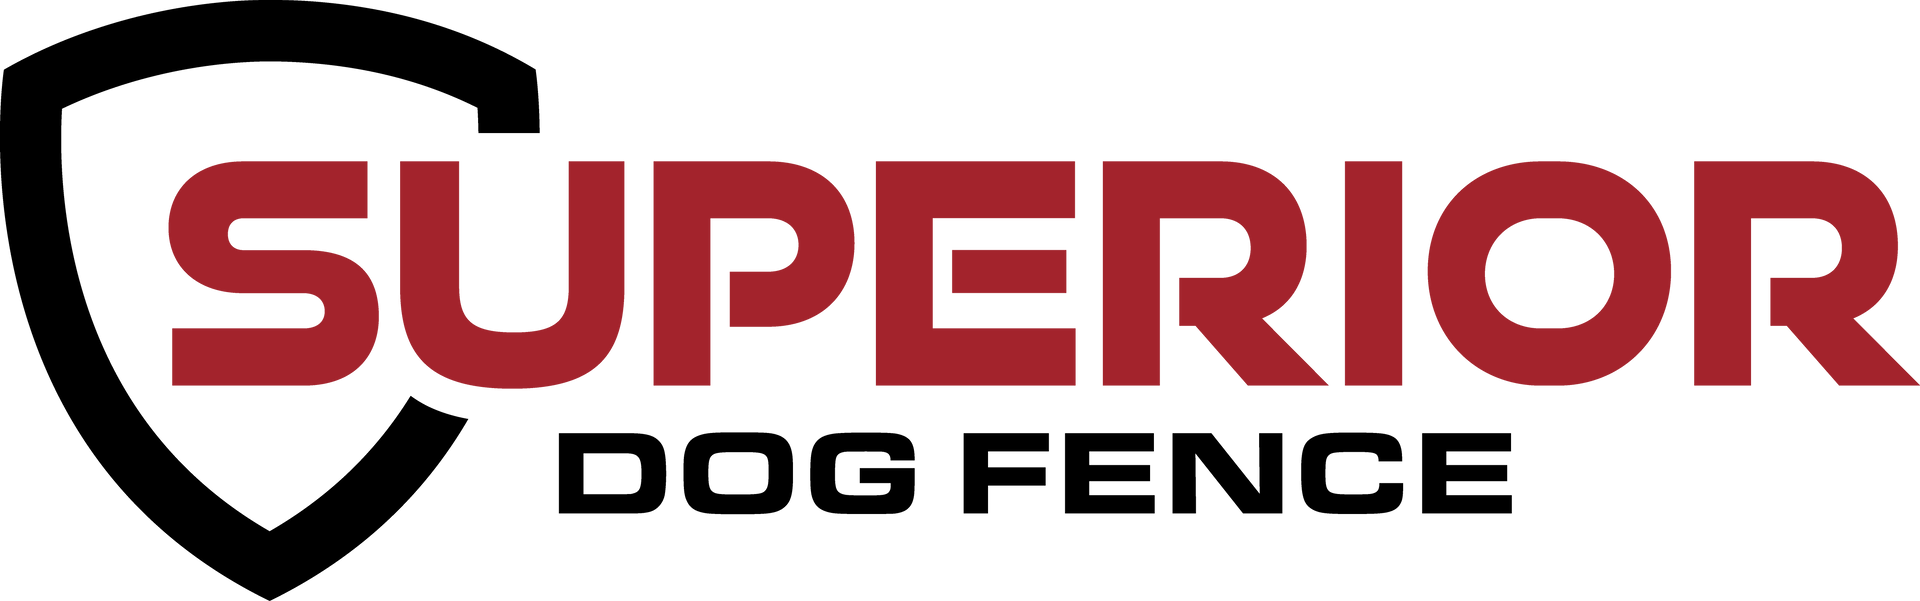 The logo for superior dog fence is red and black with a shield.